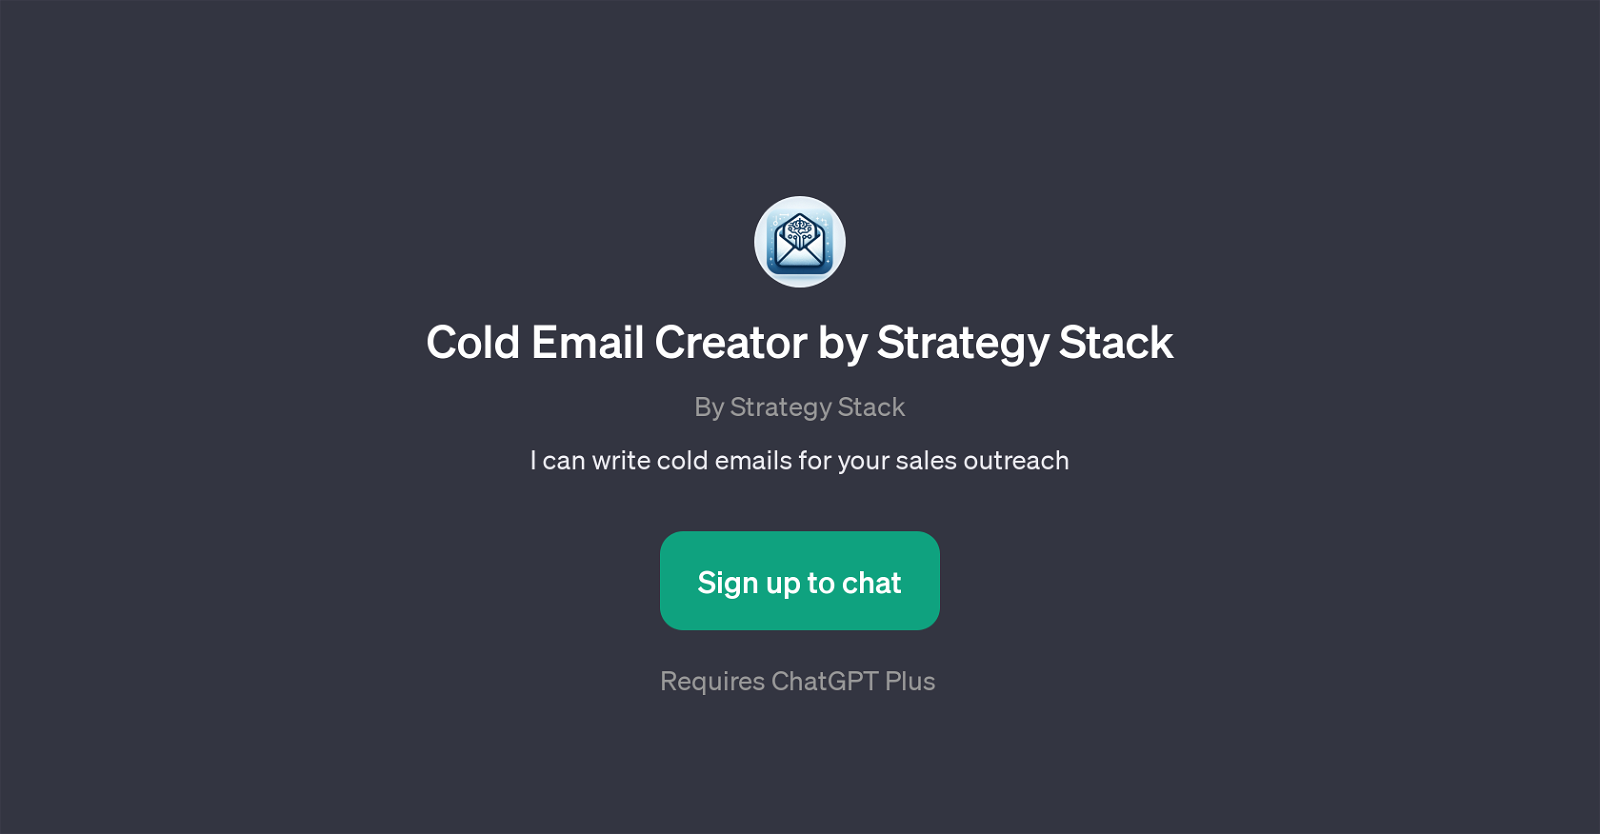 Cold Email Creator by Strategy Stack website